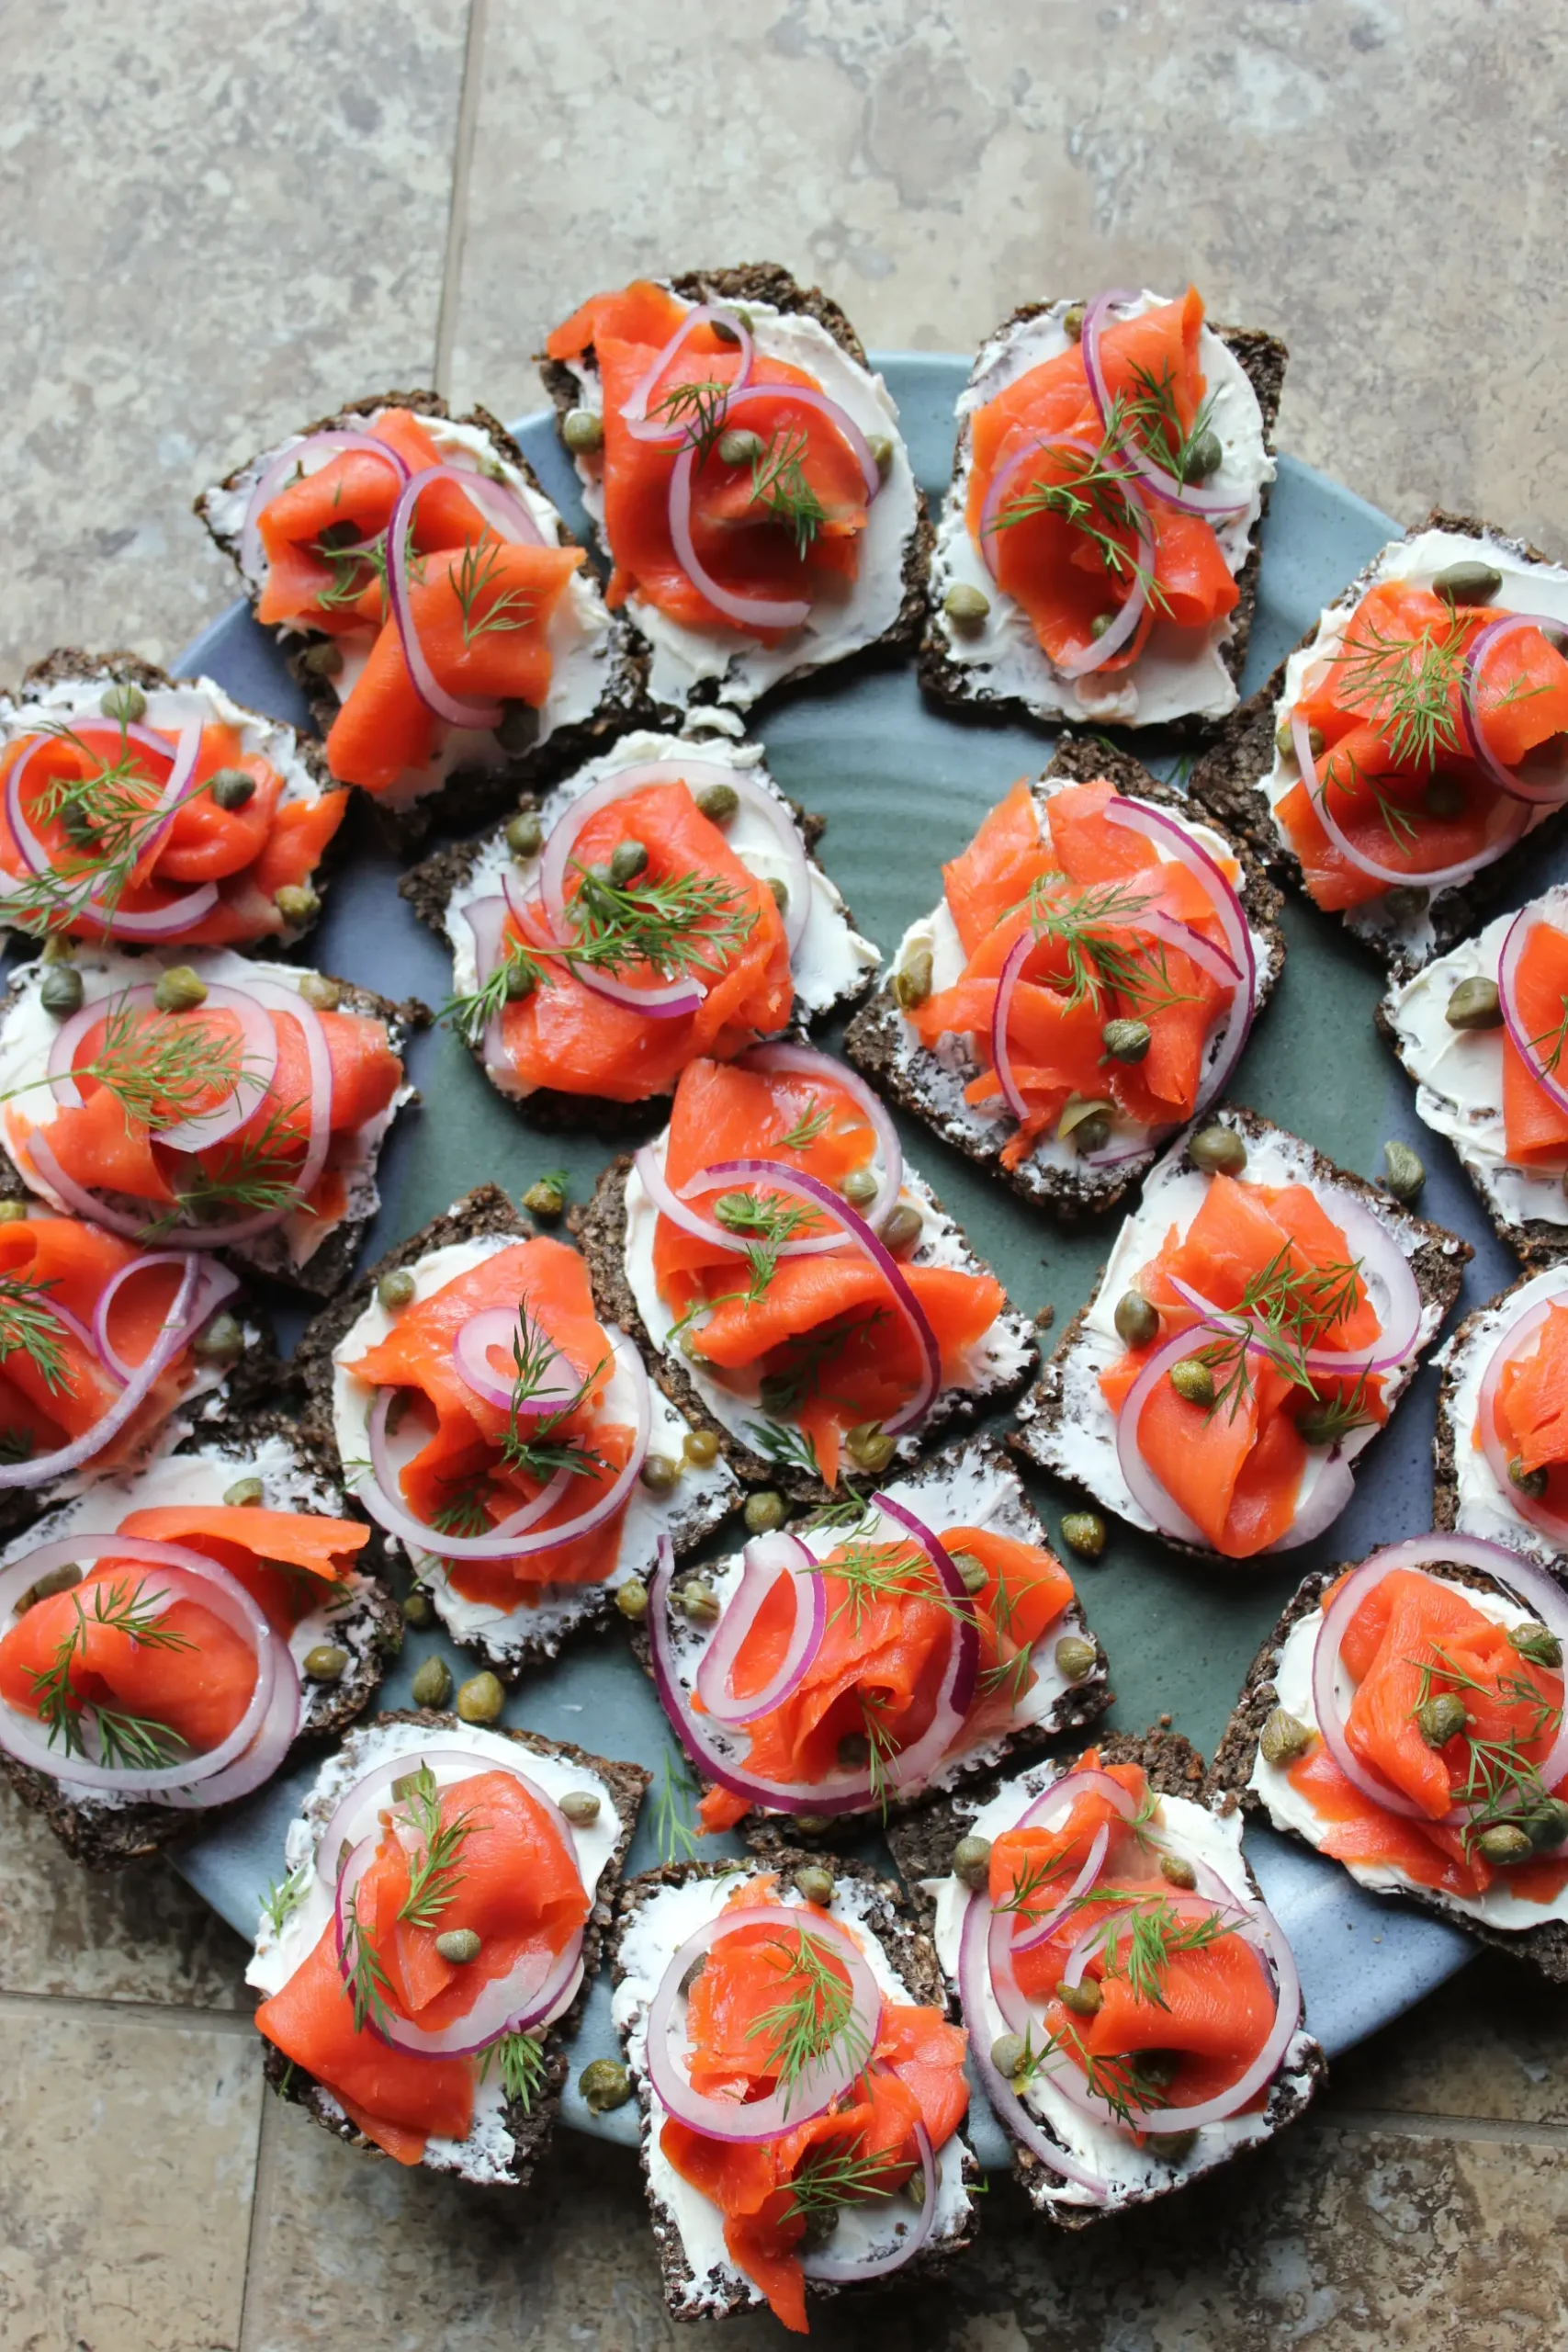 pumpernickel smoked salmon canapes - What to serve on pumpernickel bread